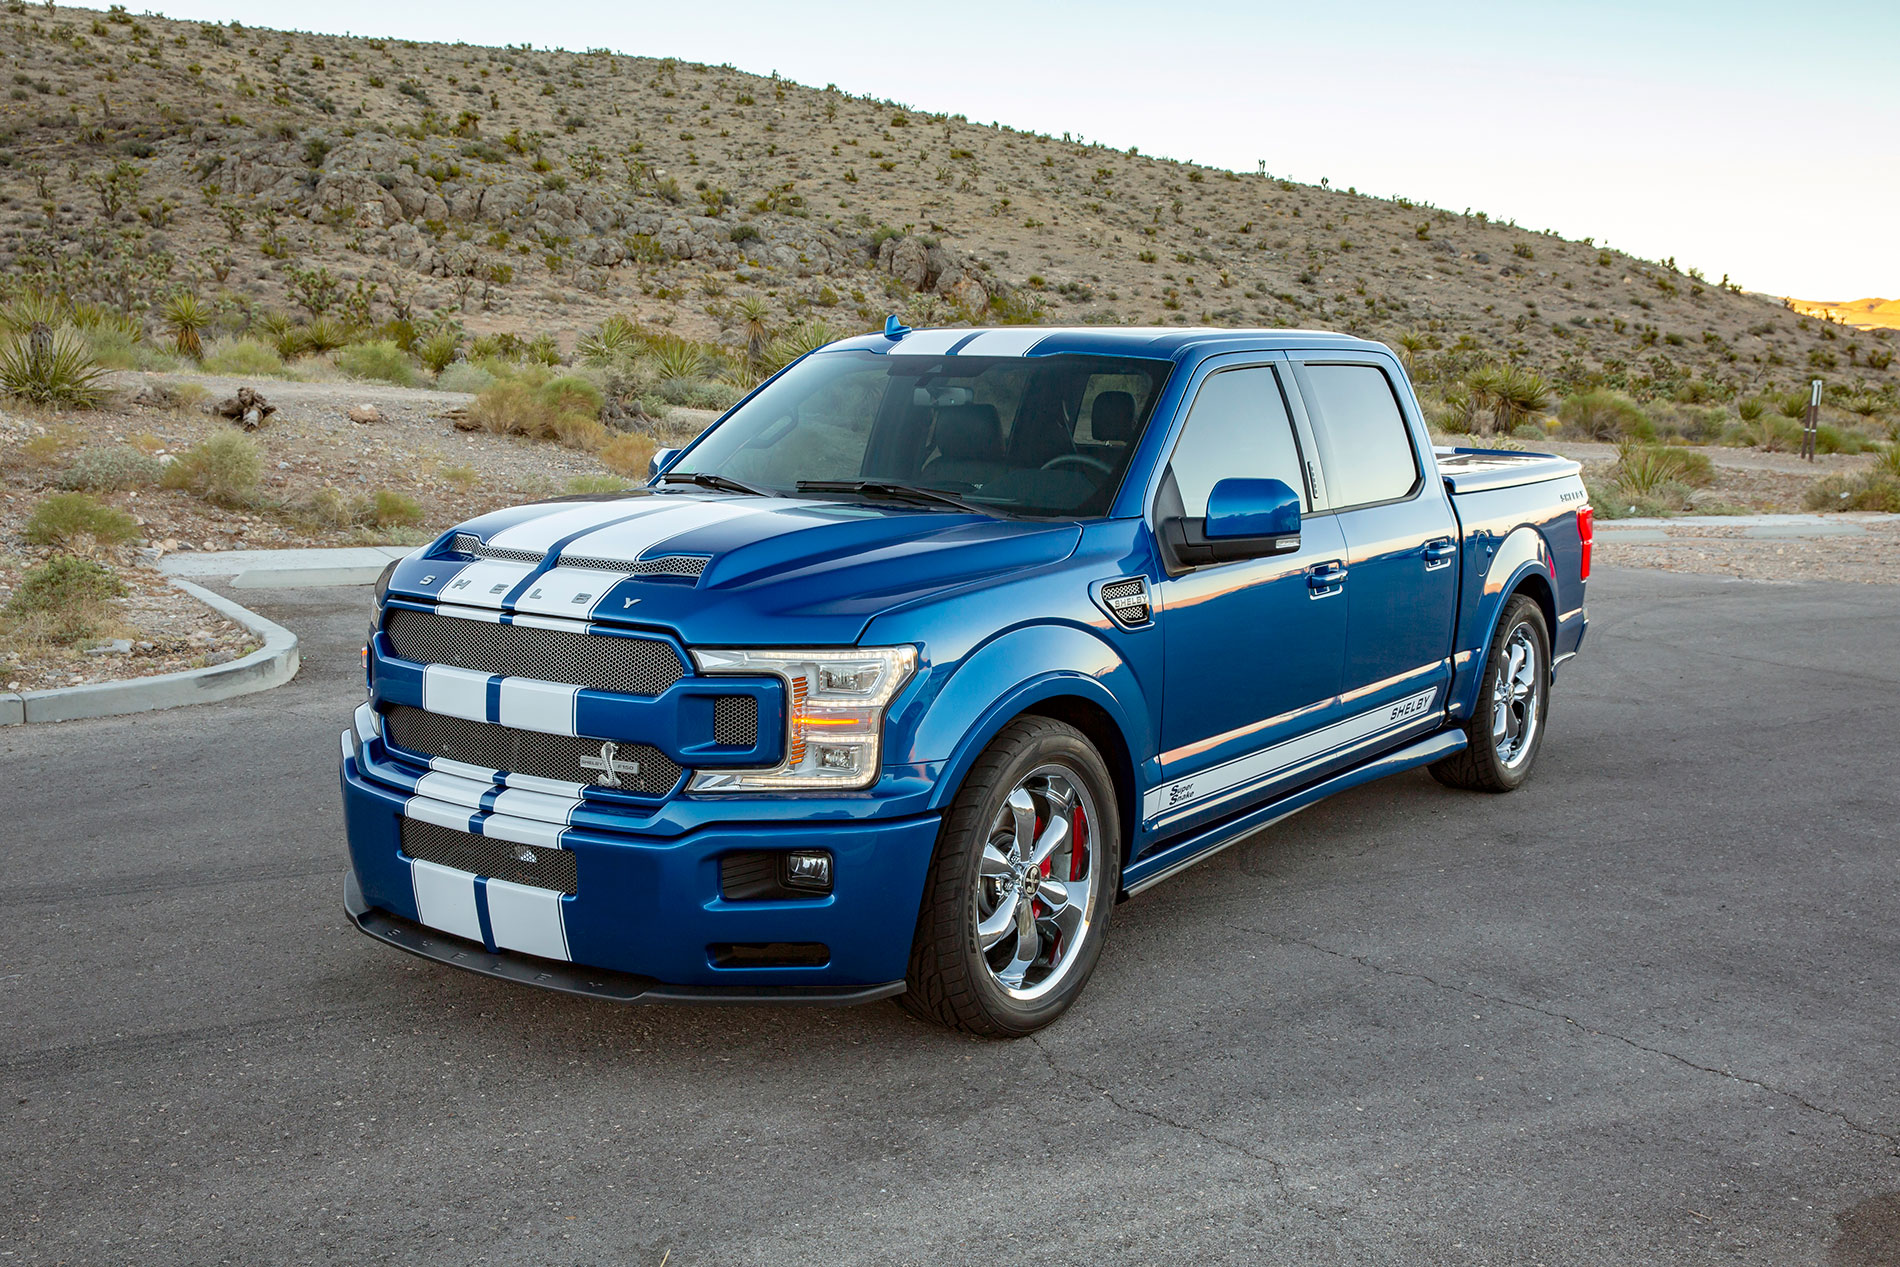 Shelby F150 Super Snake for Sale in Littleton, CO AutoNation Ford